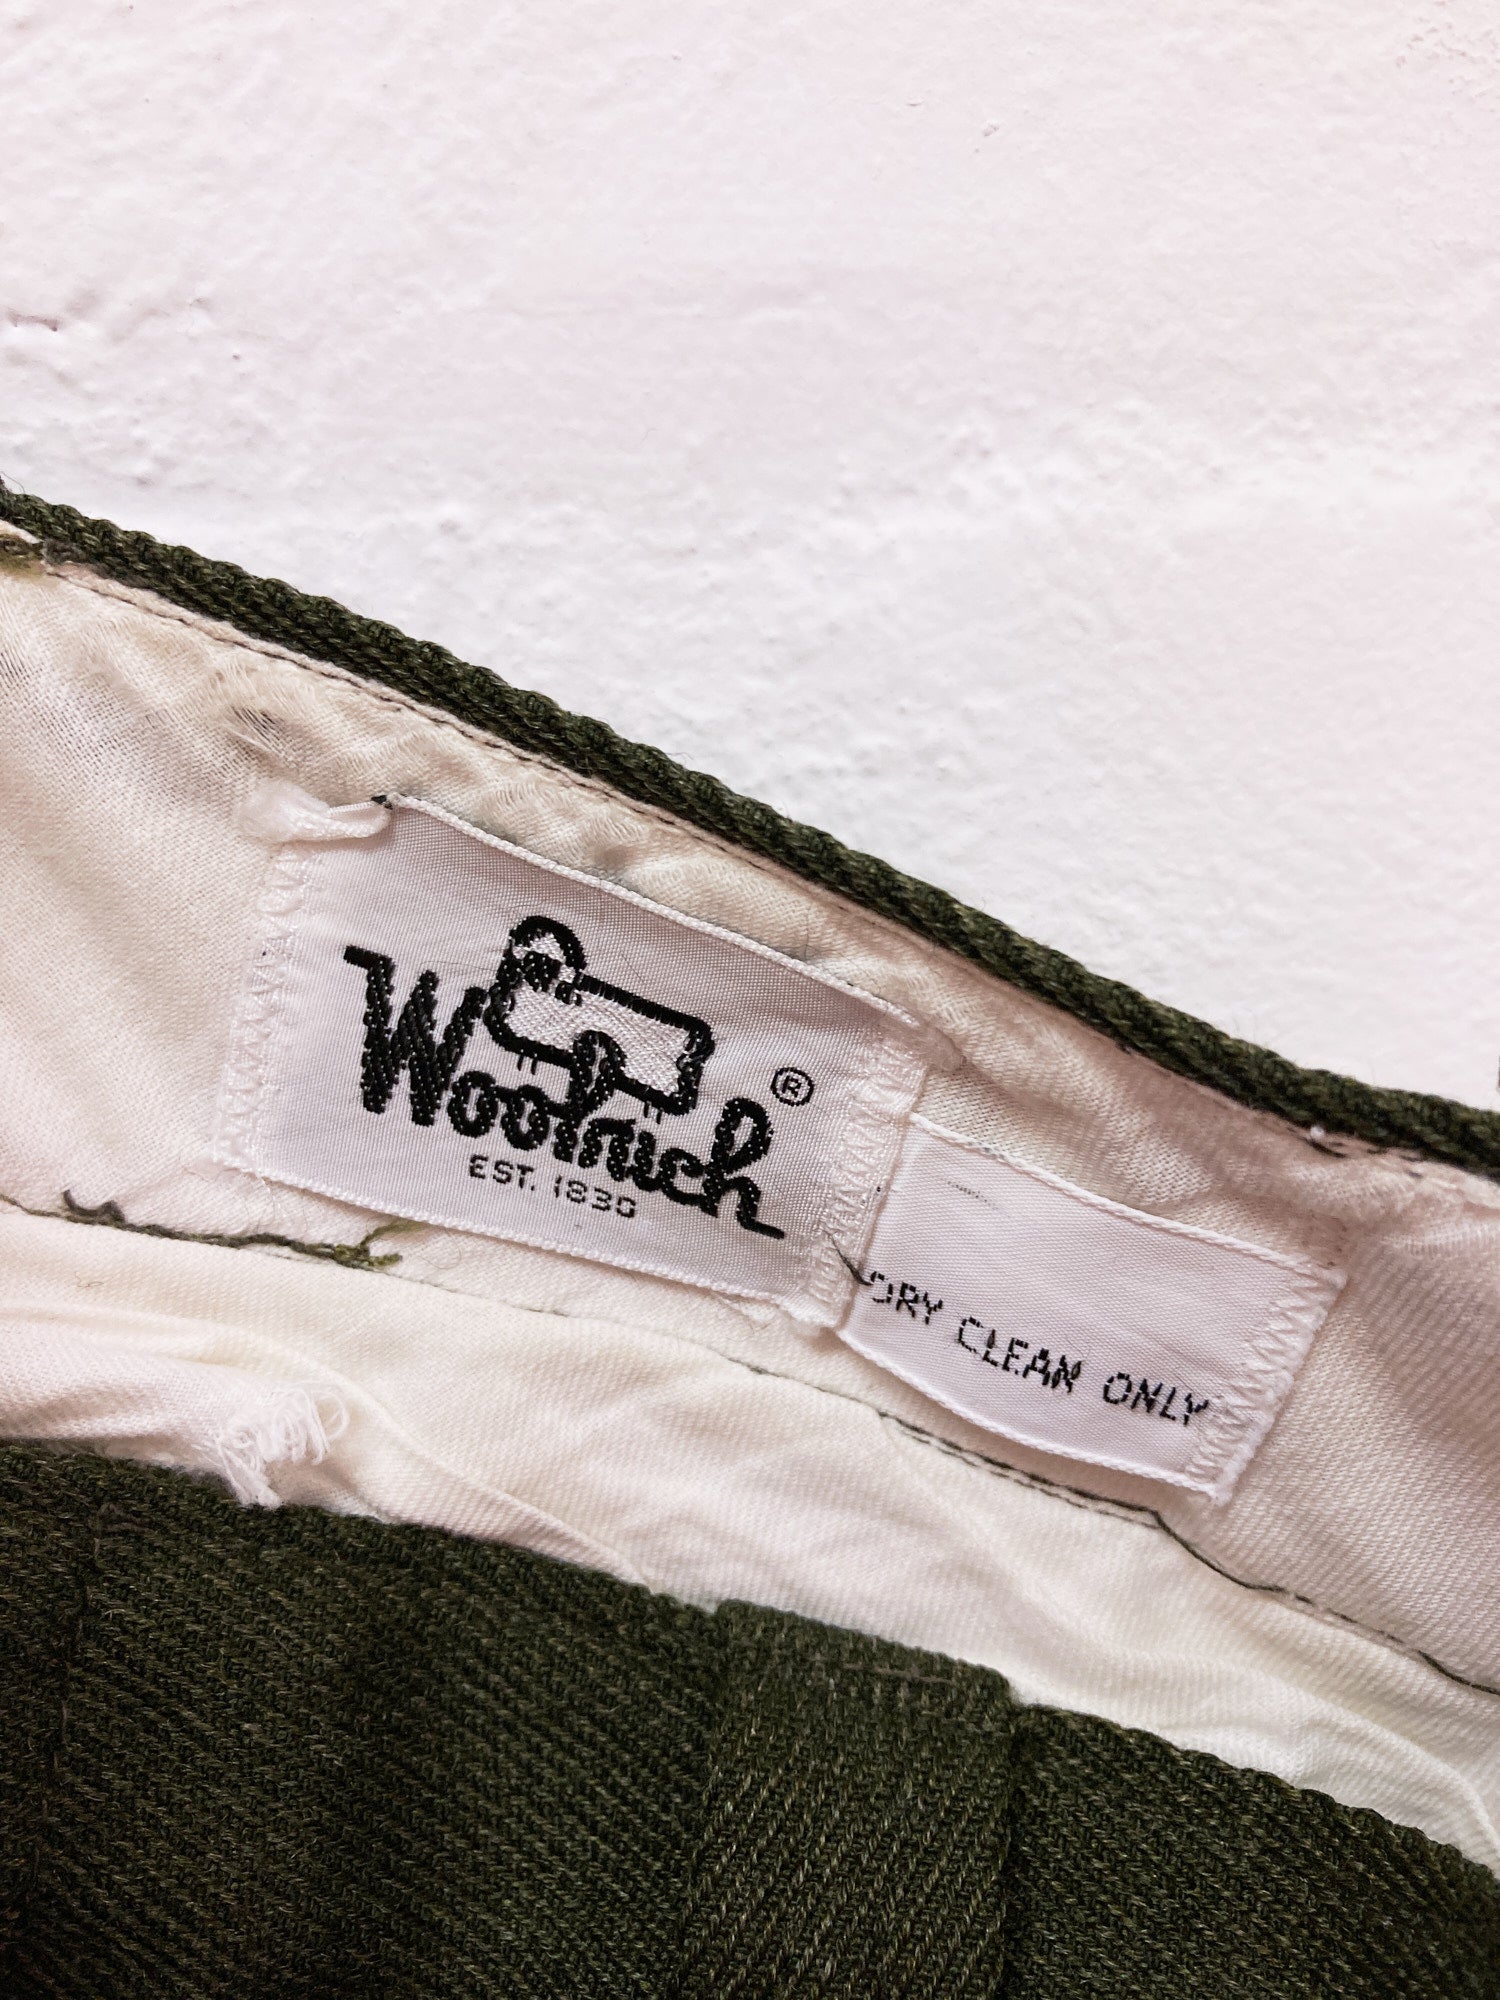 Woolrich green wool polyester twill contrast trim trousers